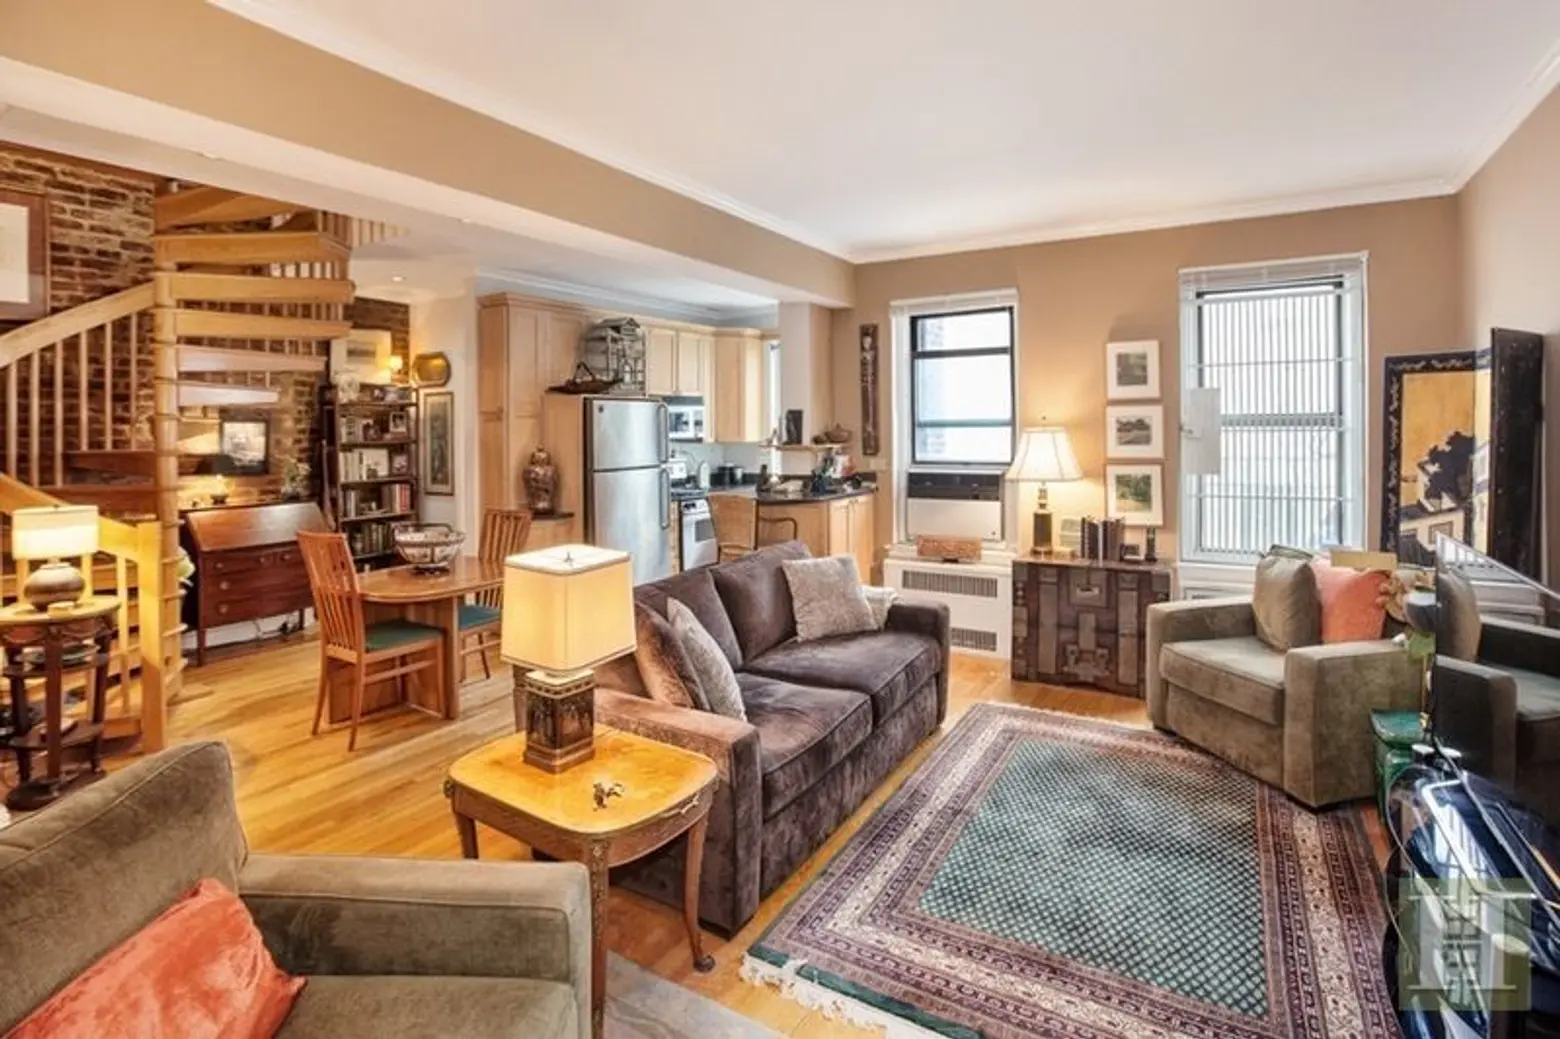 For $1M this Hell’s Kitchen duplex has lots of wood and brick and plenty of flexibility